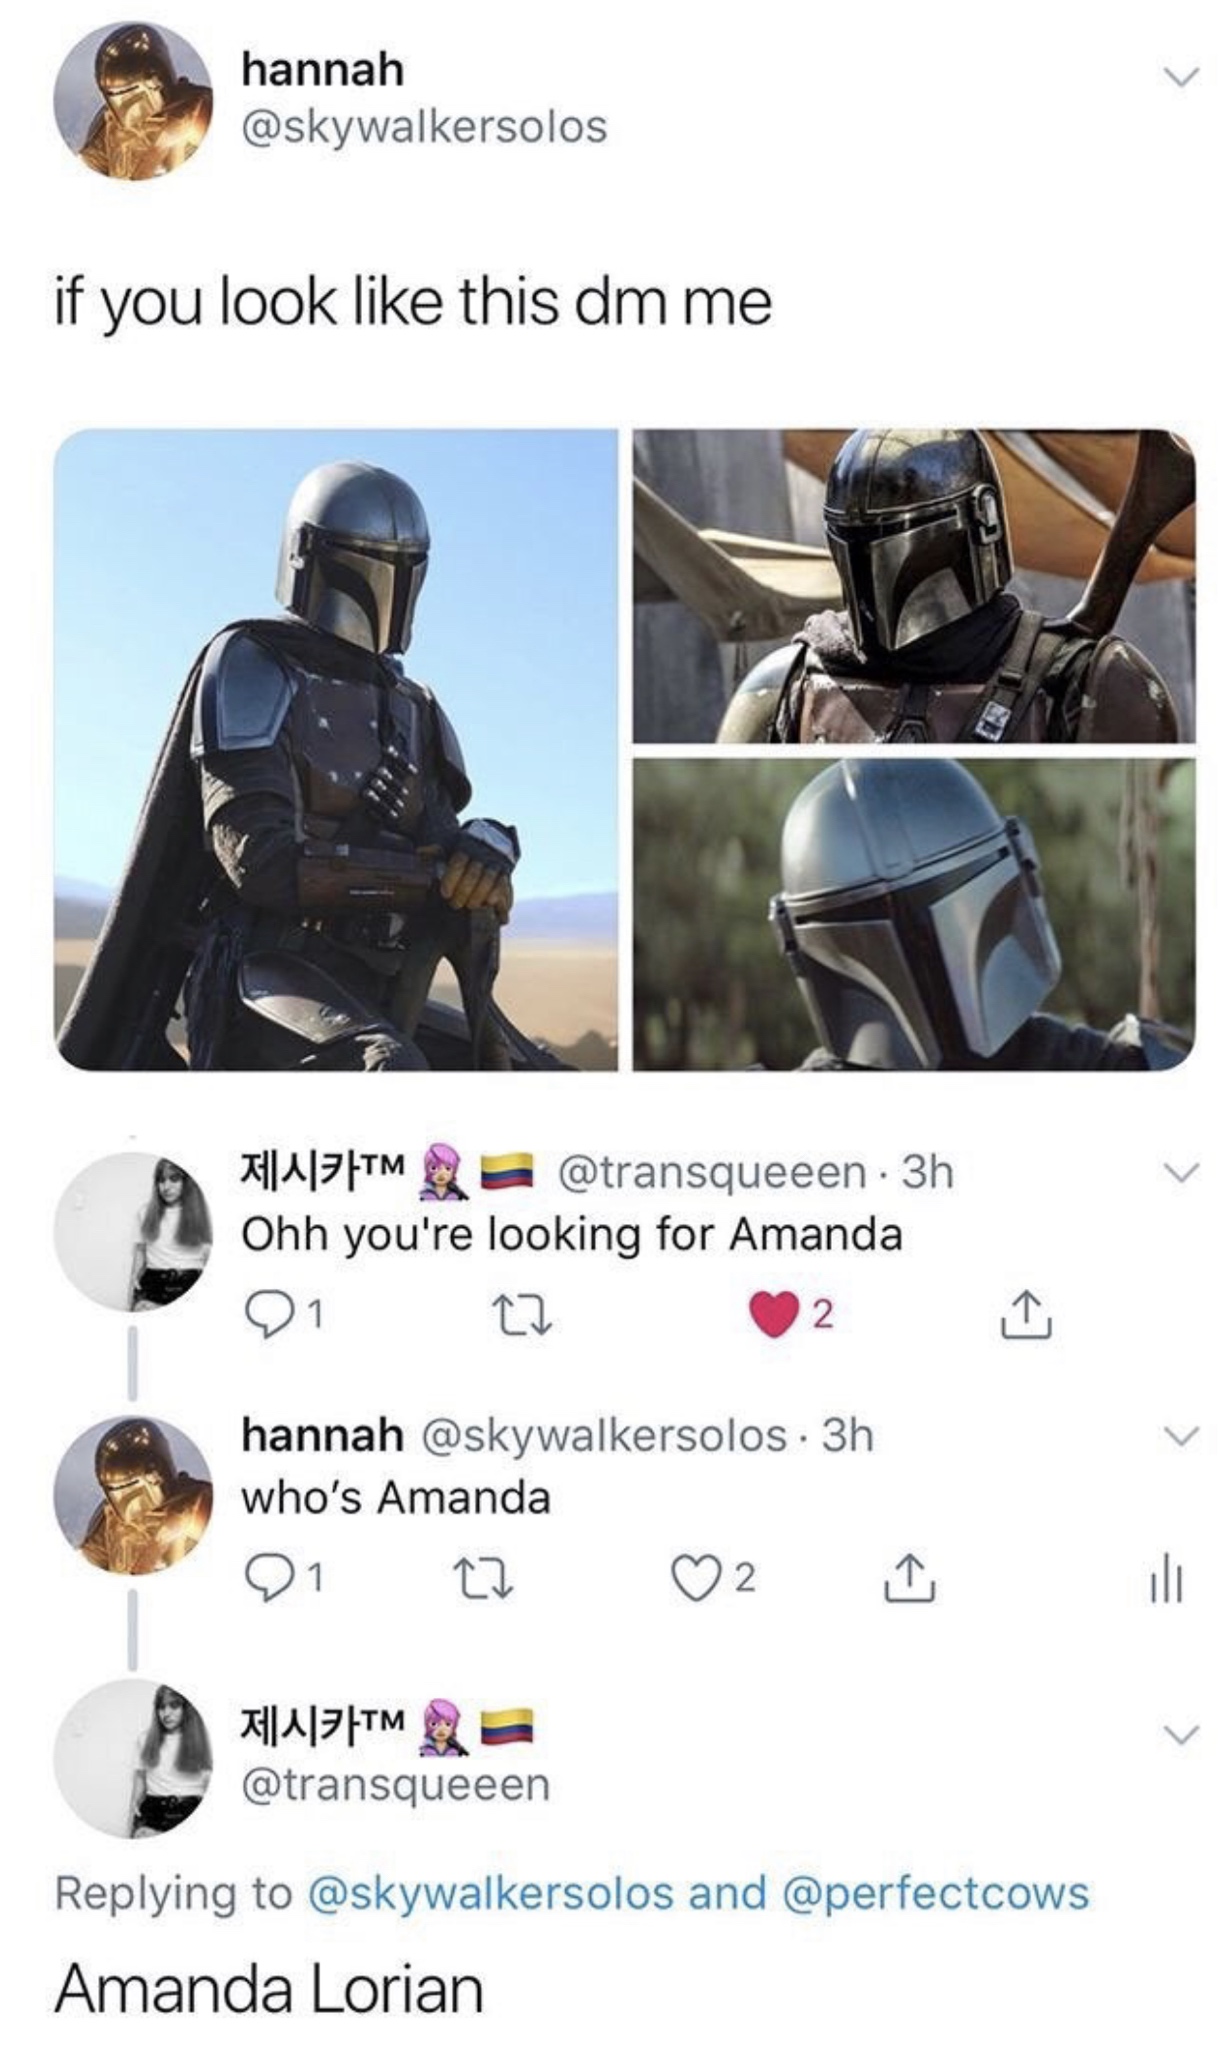 helmet - hannah if you look this dm me TM4 . 3h Ohh you're looking for Amanda 21 Cz 2 hannah . 3h who's Amanda 01 to 02 ill Ws and Amanda Lorian